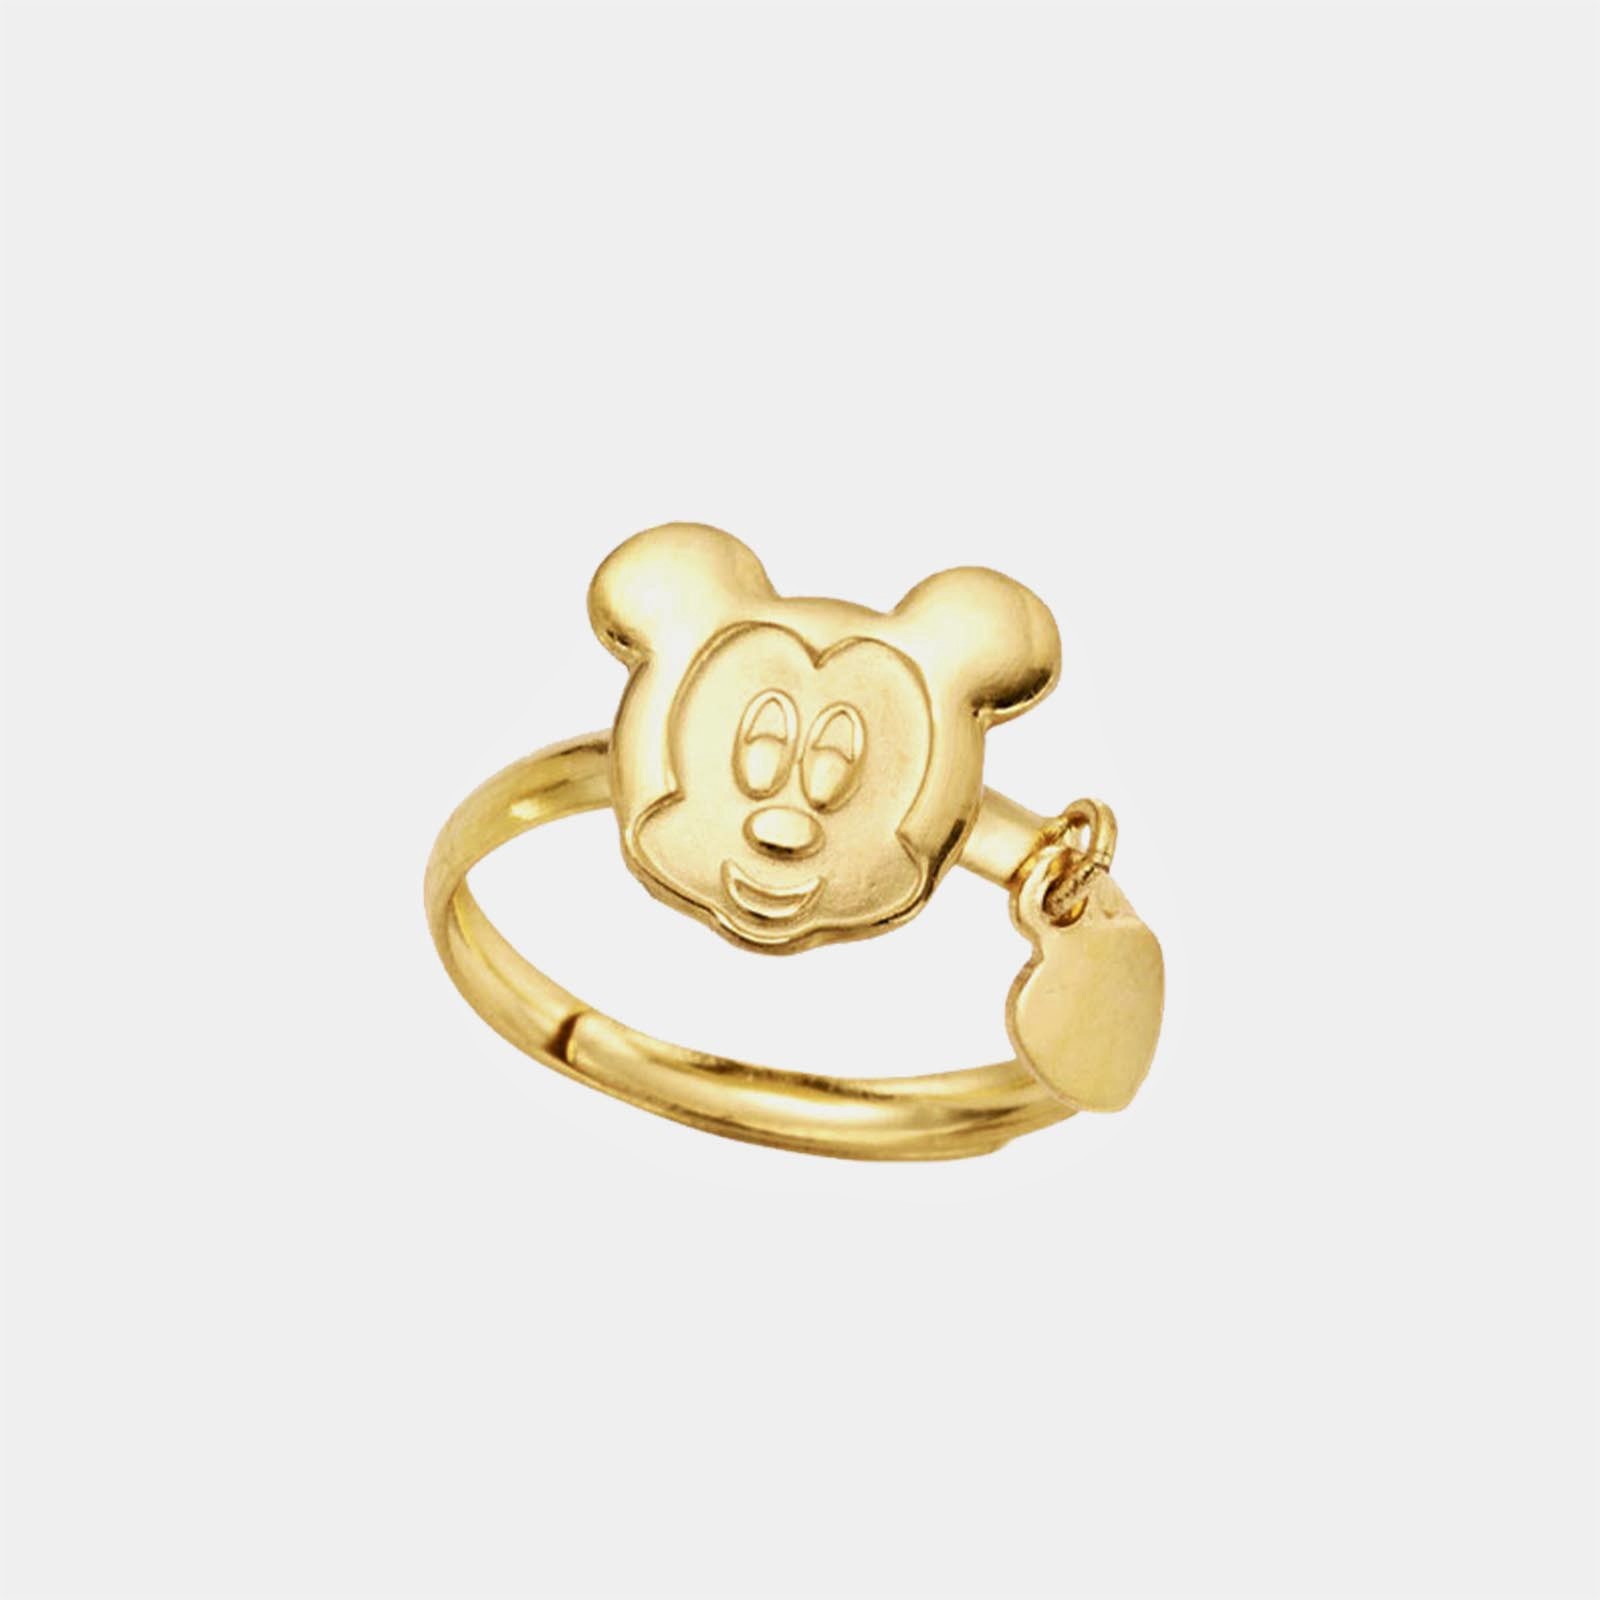 Poh Heng Disney Mickey Ring with Charm in 22K Yellow Gold	